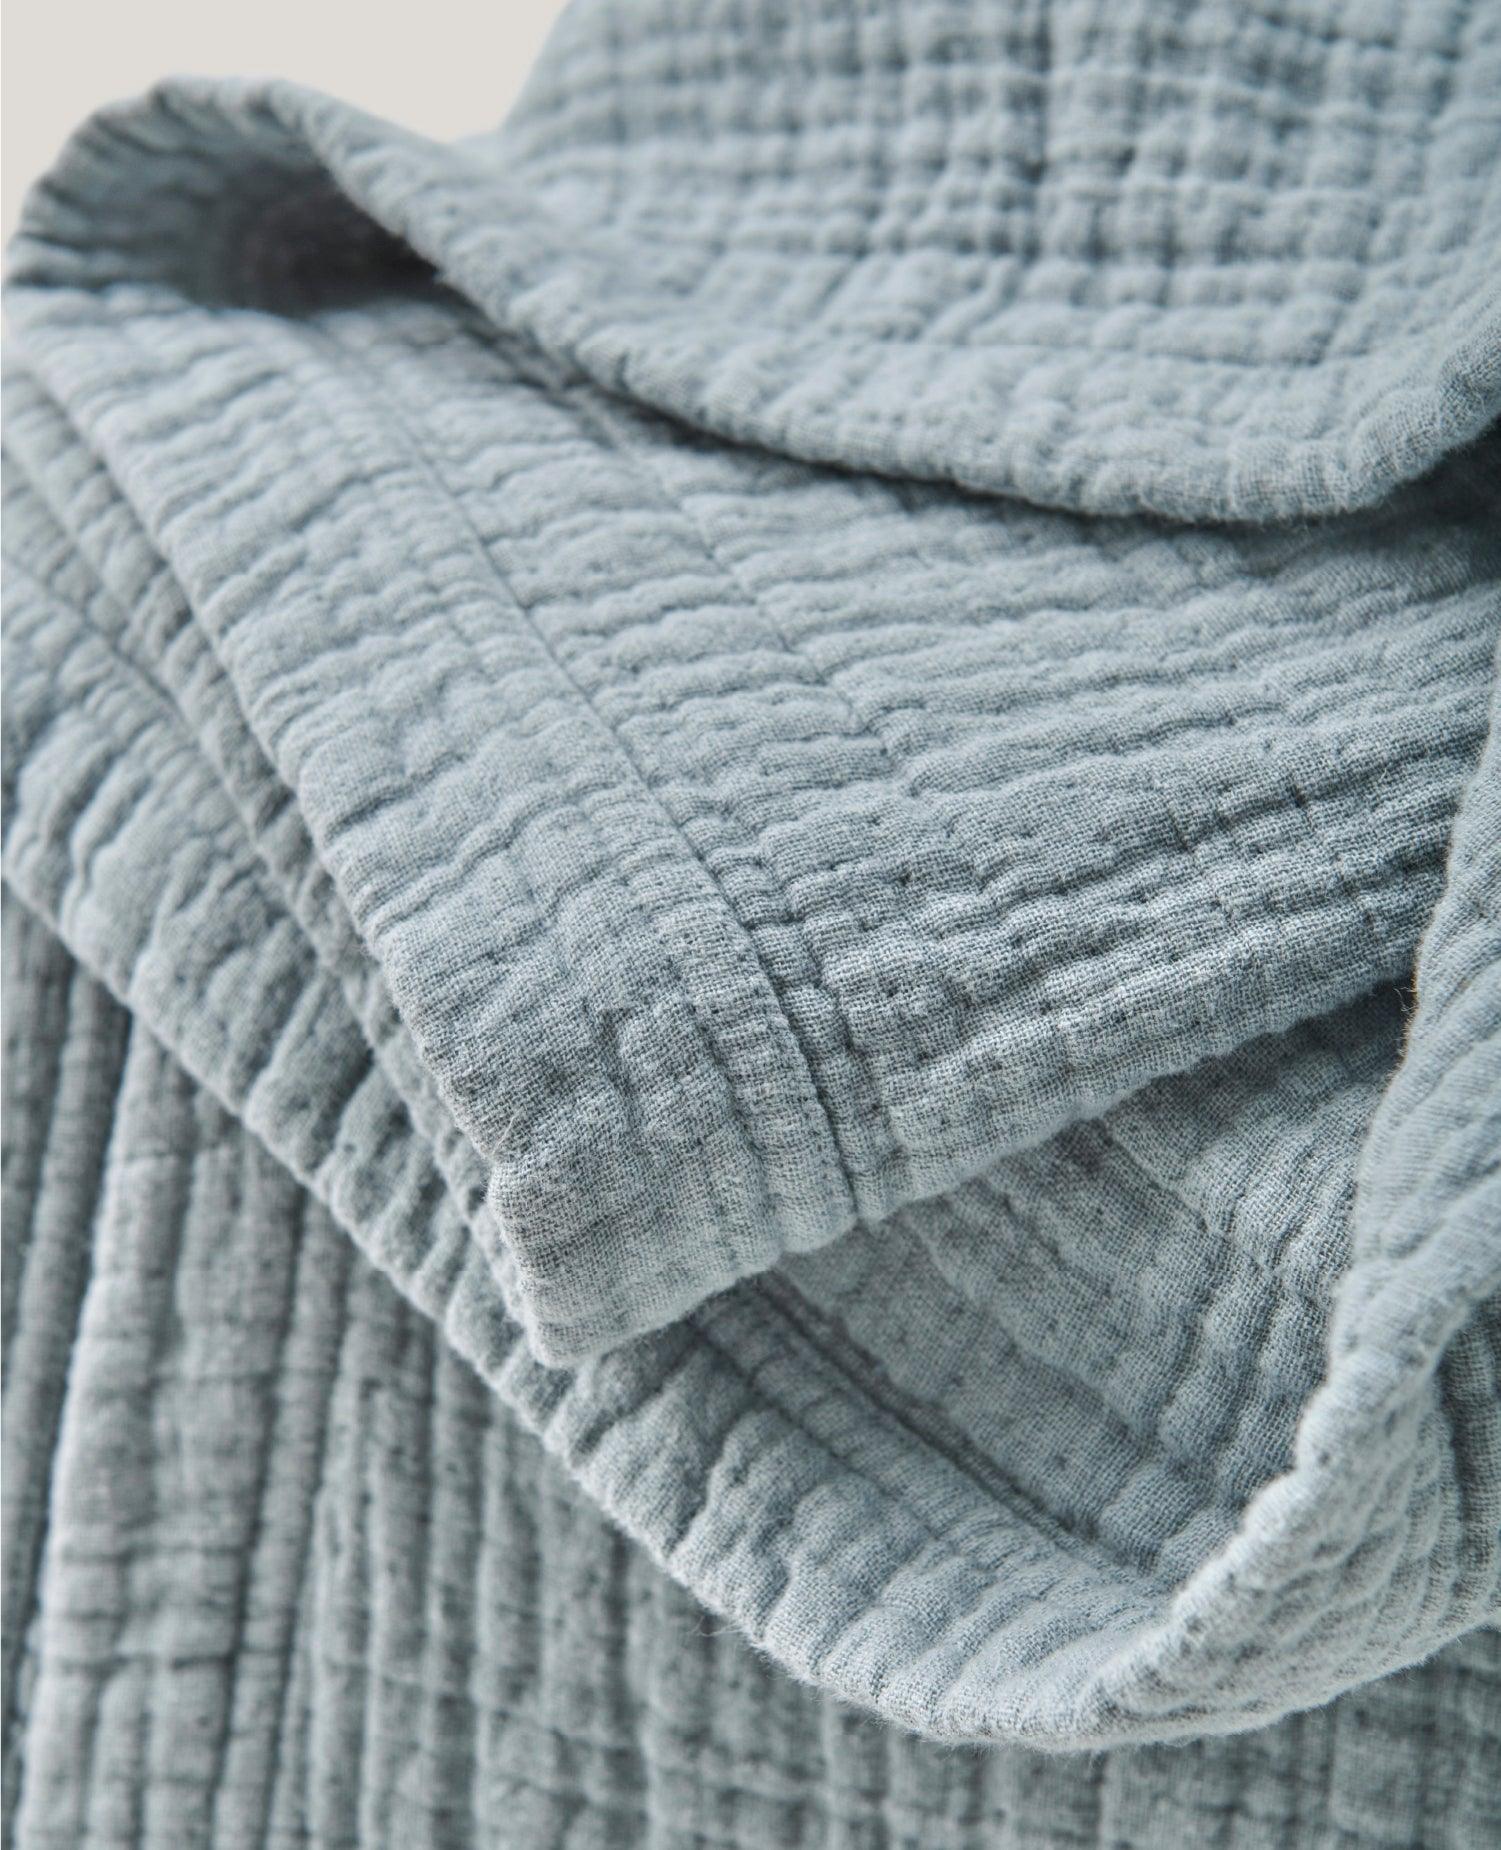 Linen Cotton Throw Blanket - Double Stitch By Bedsure